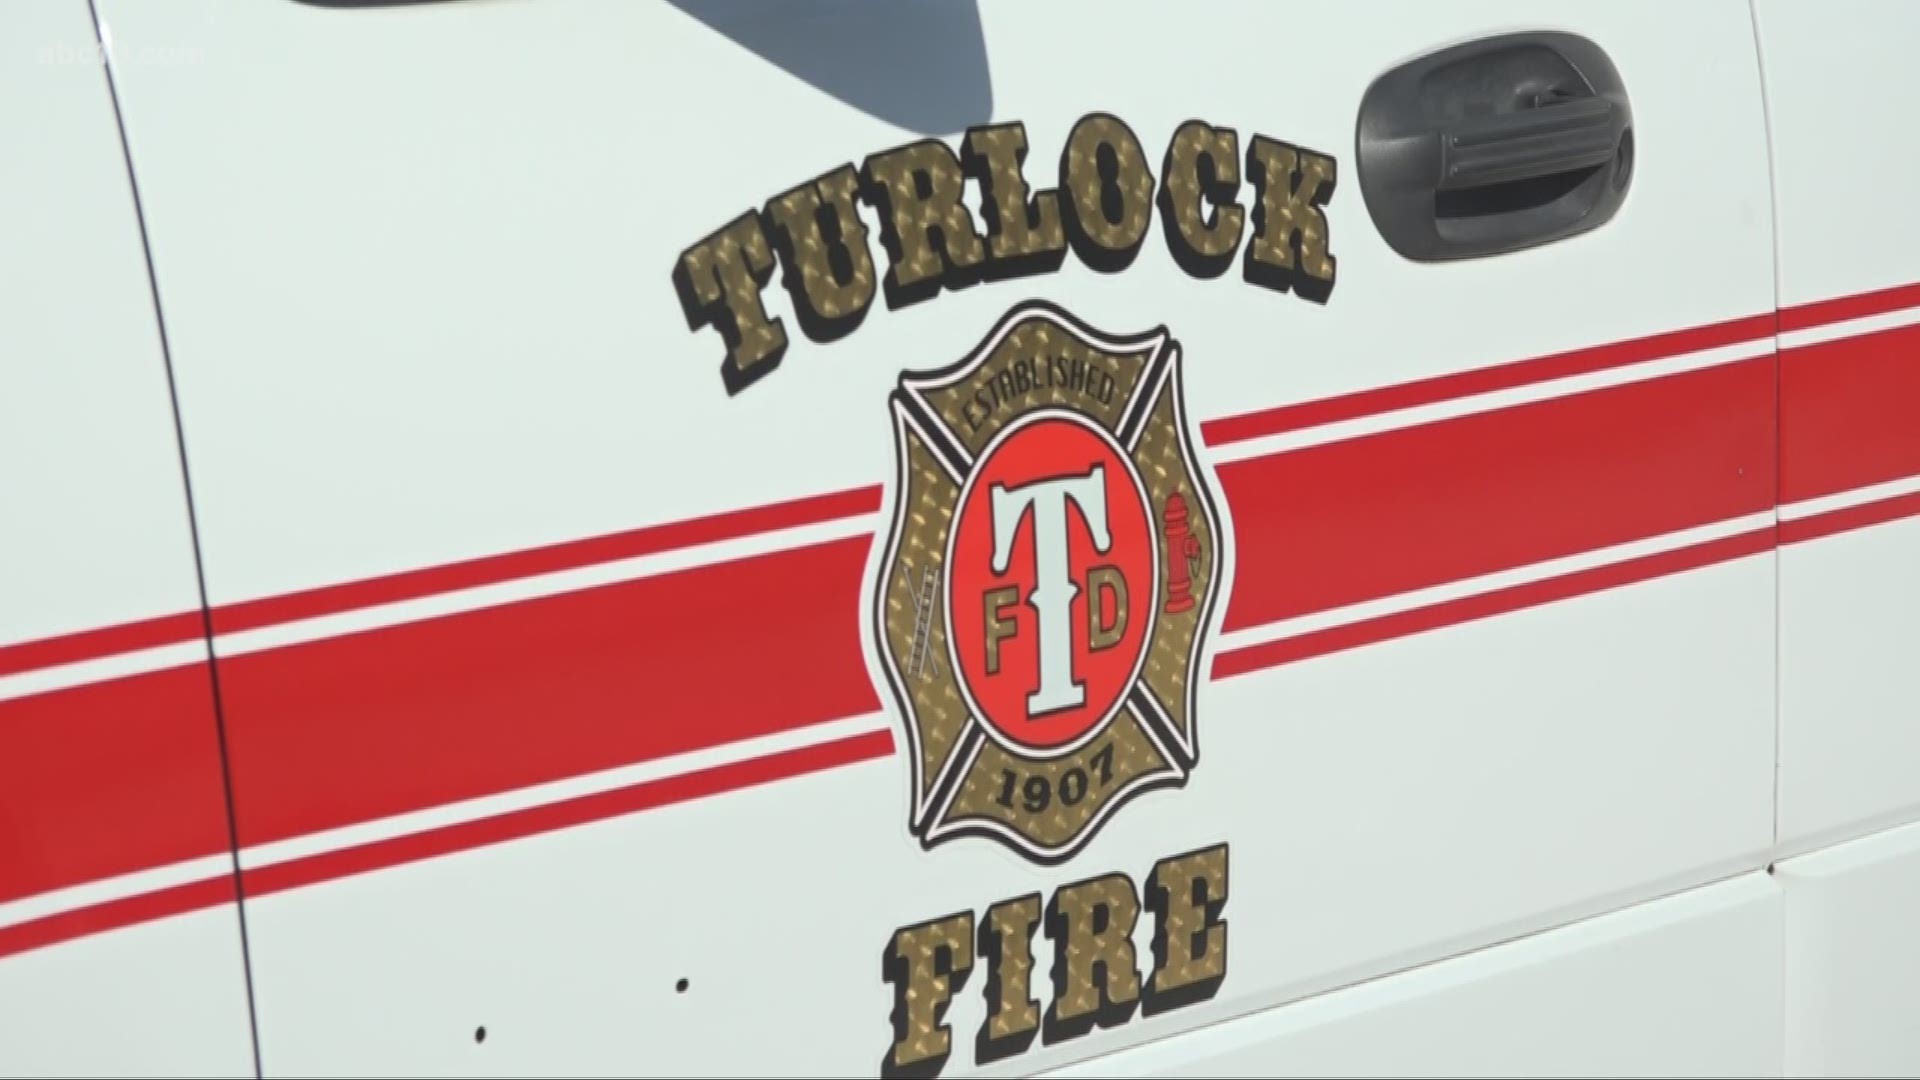 Turlock's Interim Fire Chief says one of their four fire engines has been taken out of service more than 60% of the time over the past four months.